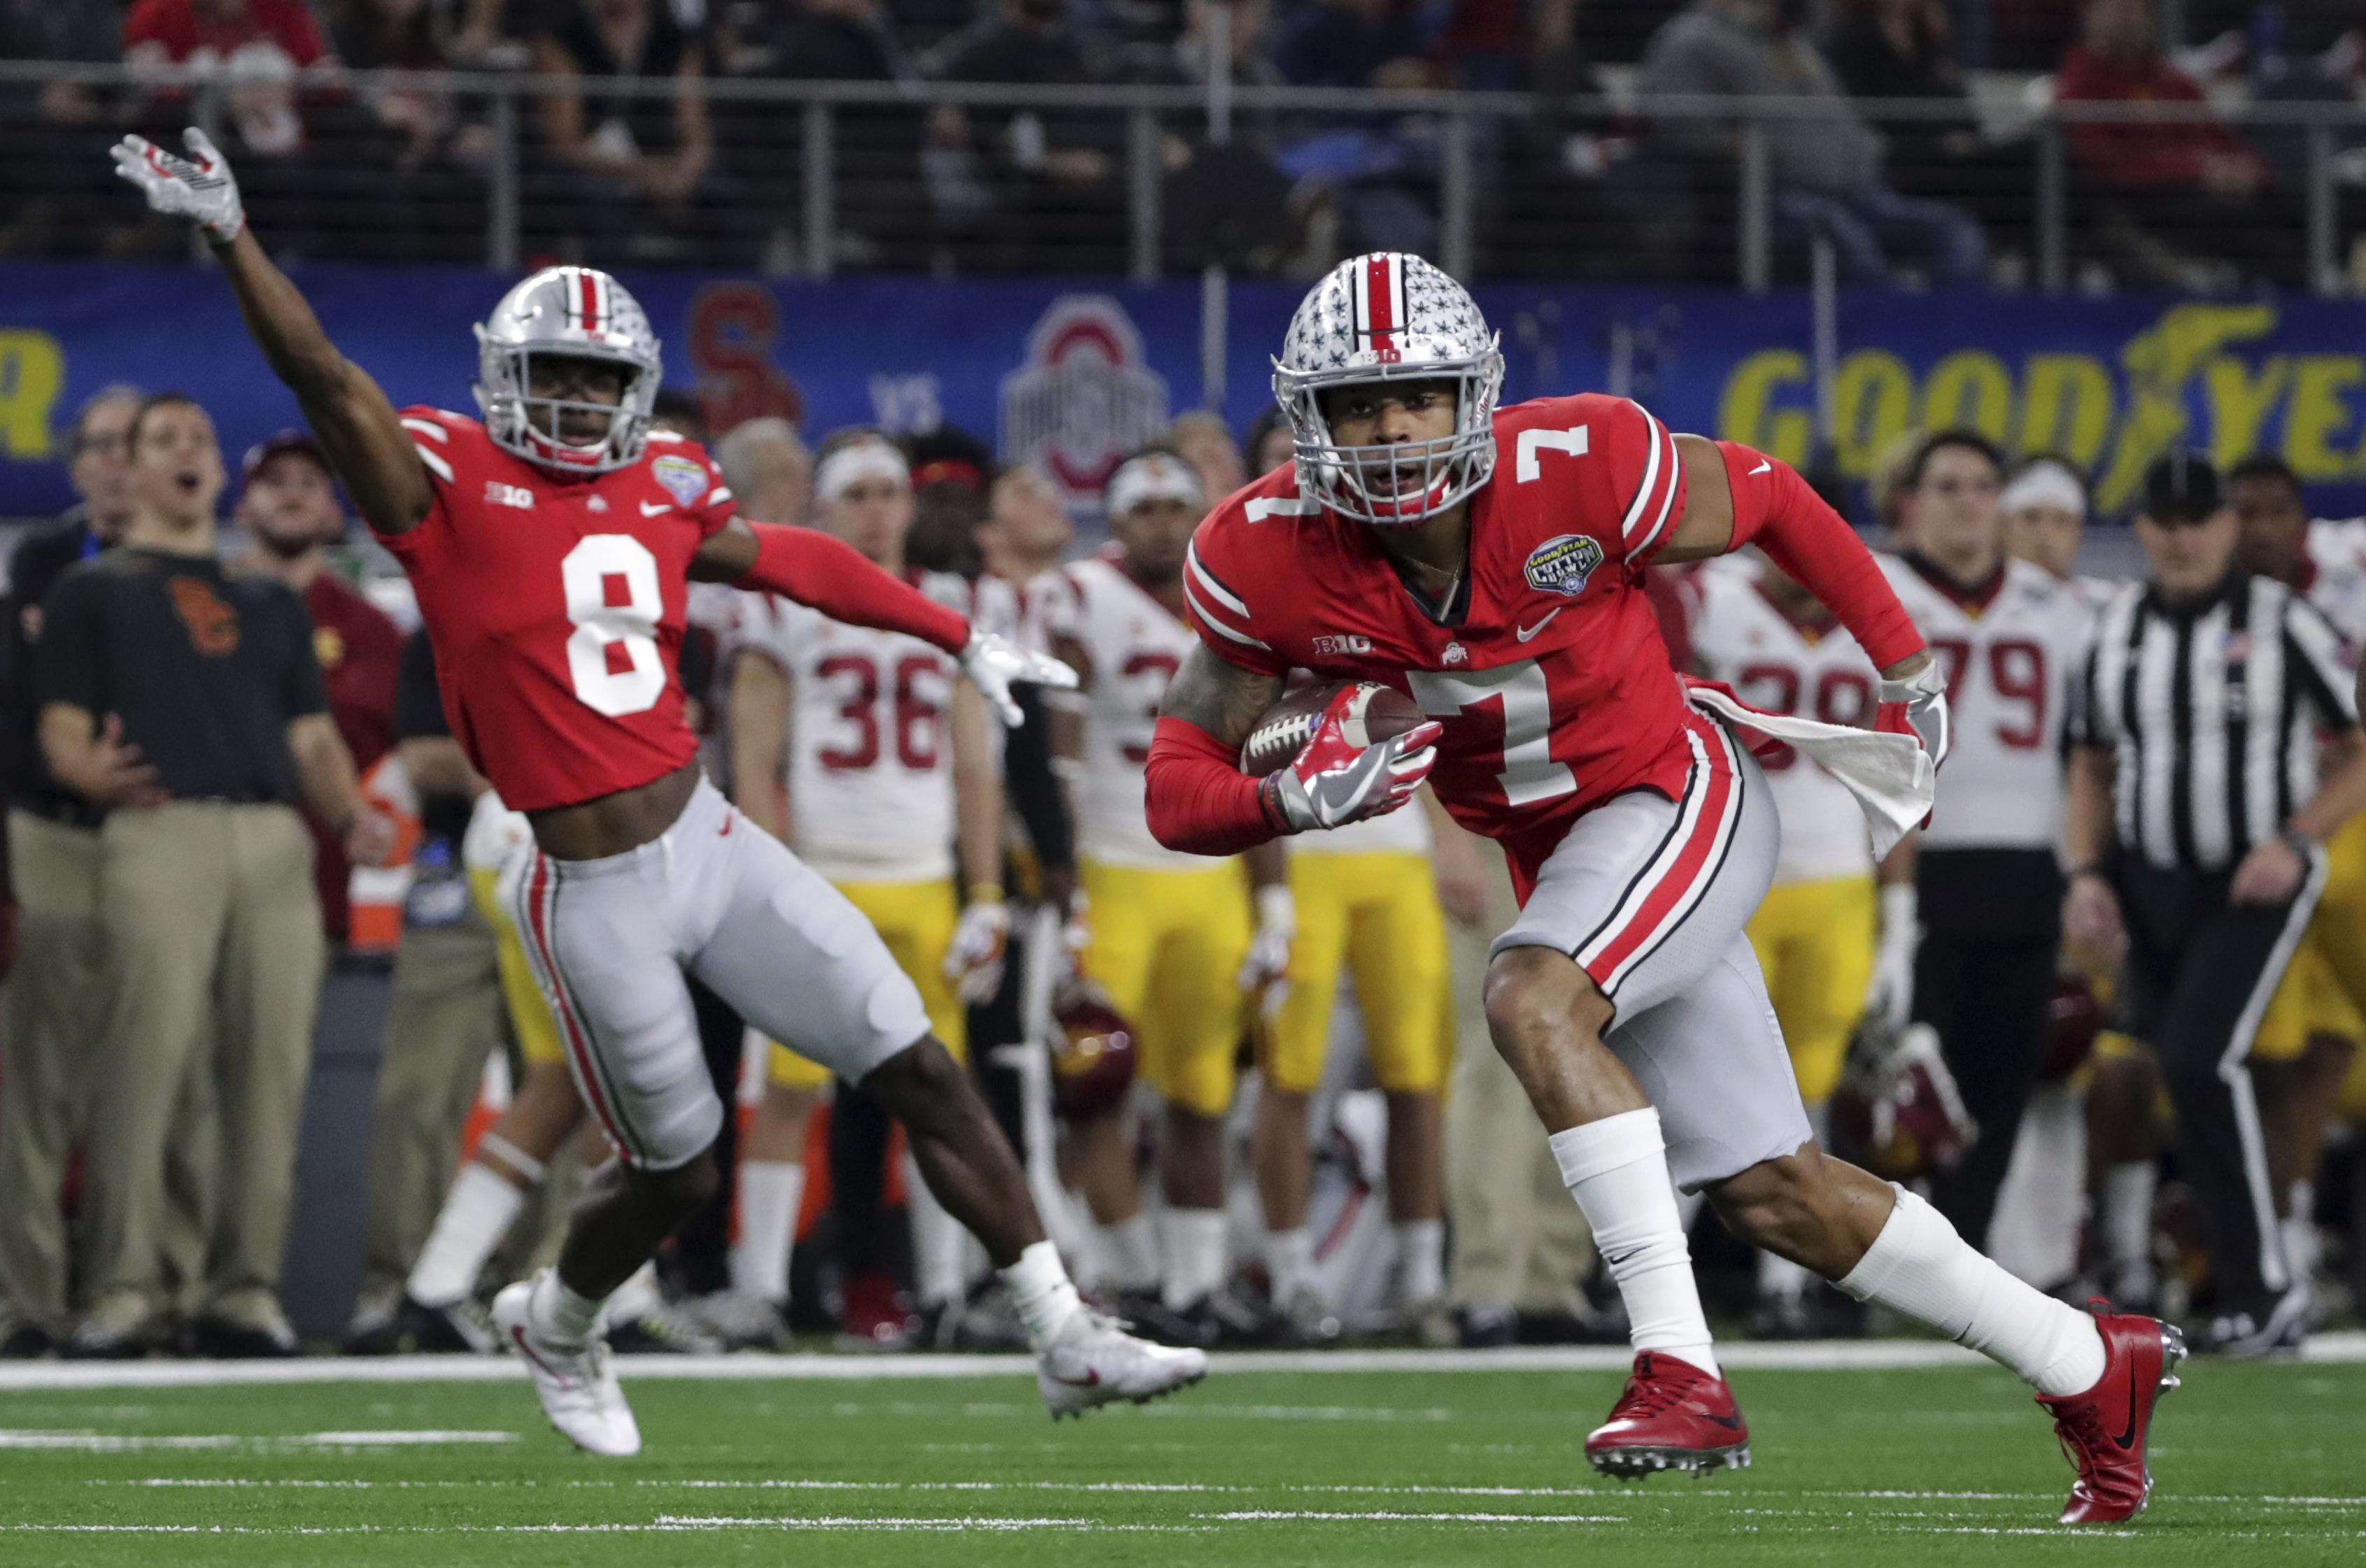 Friday’s bowl games: Ohio State has easy time with USC | The Spokesman